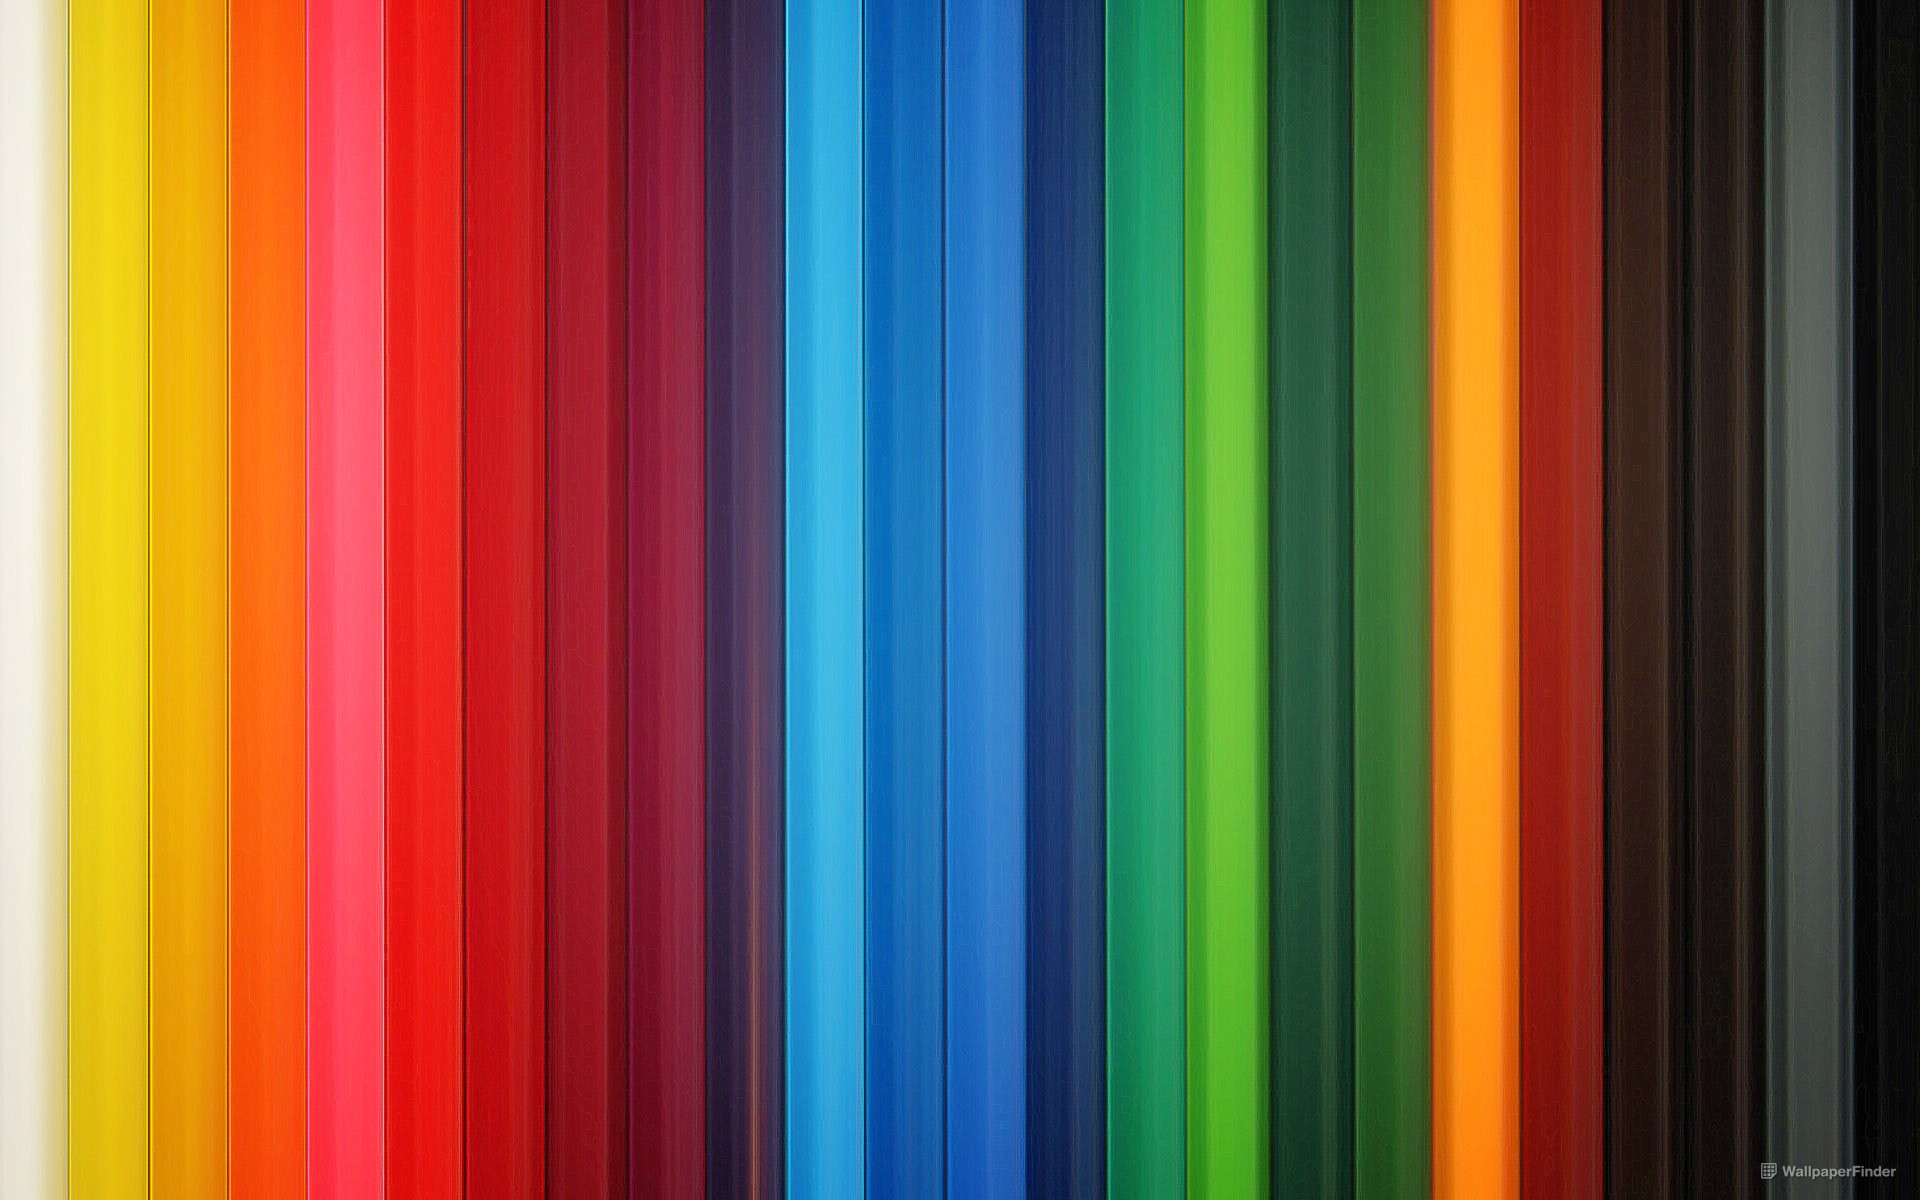 Wallpaper That Were Super Colorful And Sure To Inspire Some Great